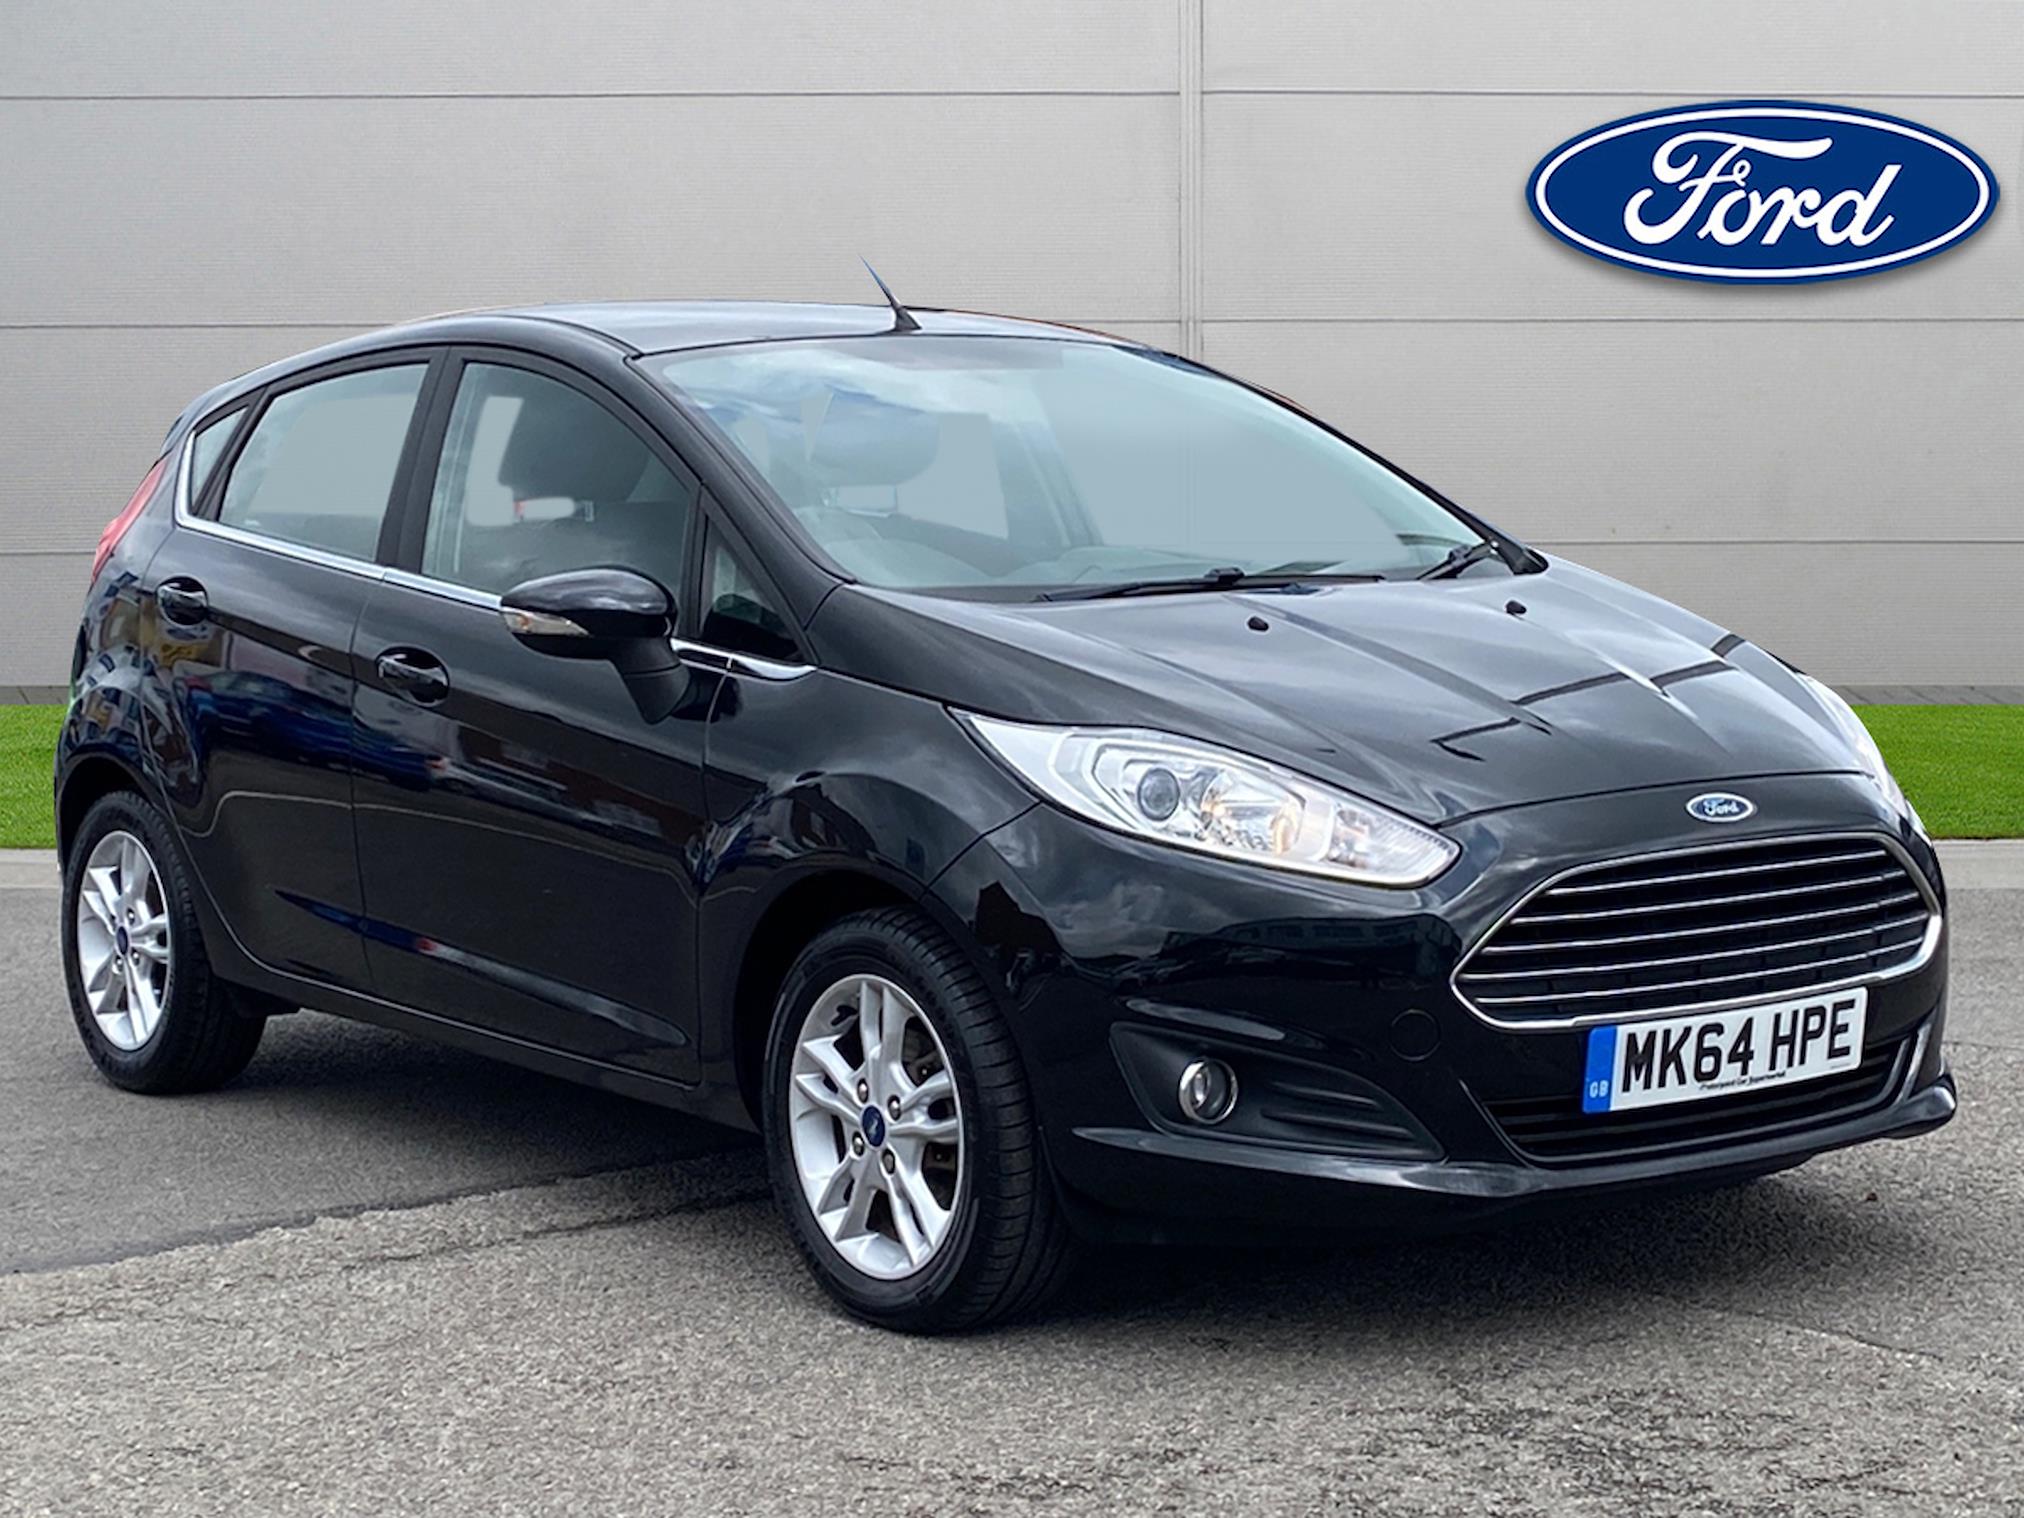 Used FORD FIESTA 1.0 Ecoboost Zetec 5Dr 2014